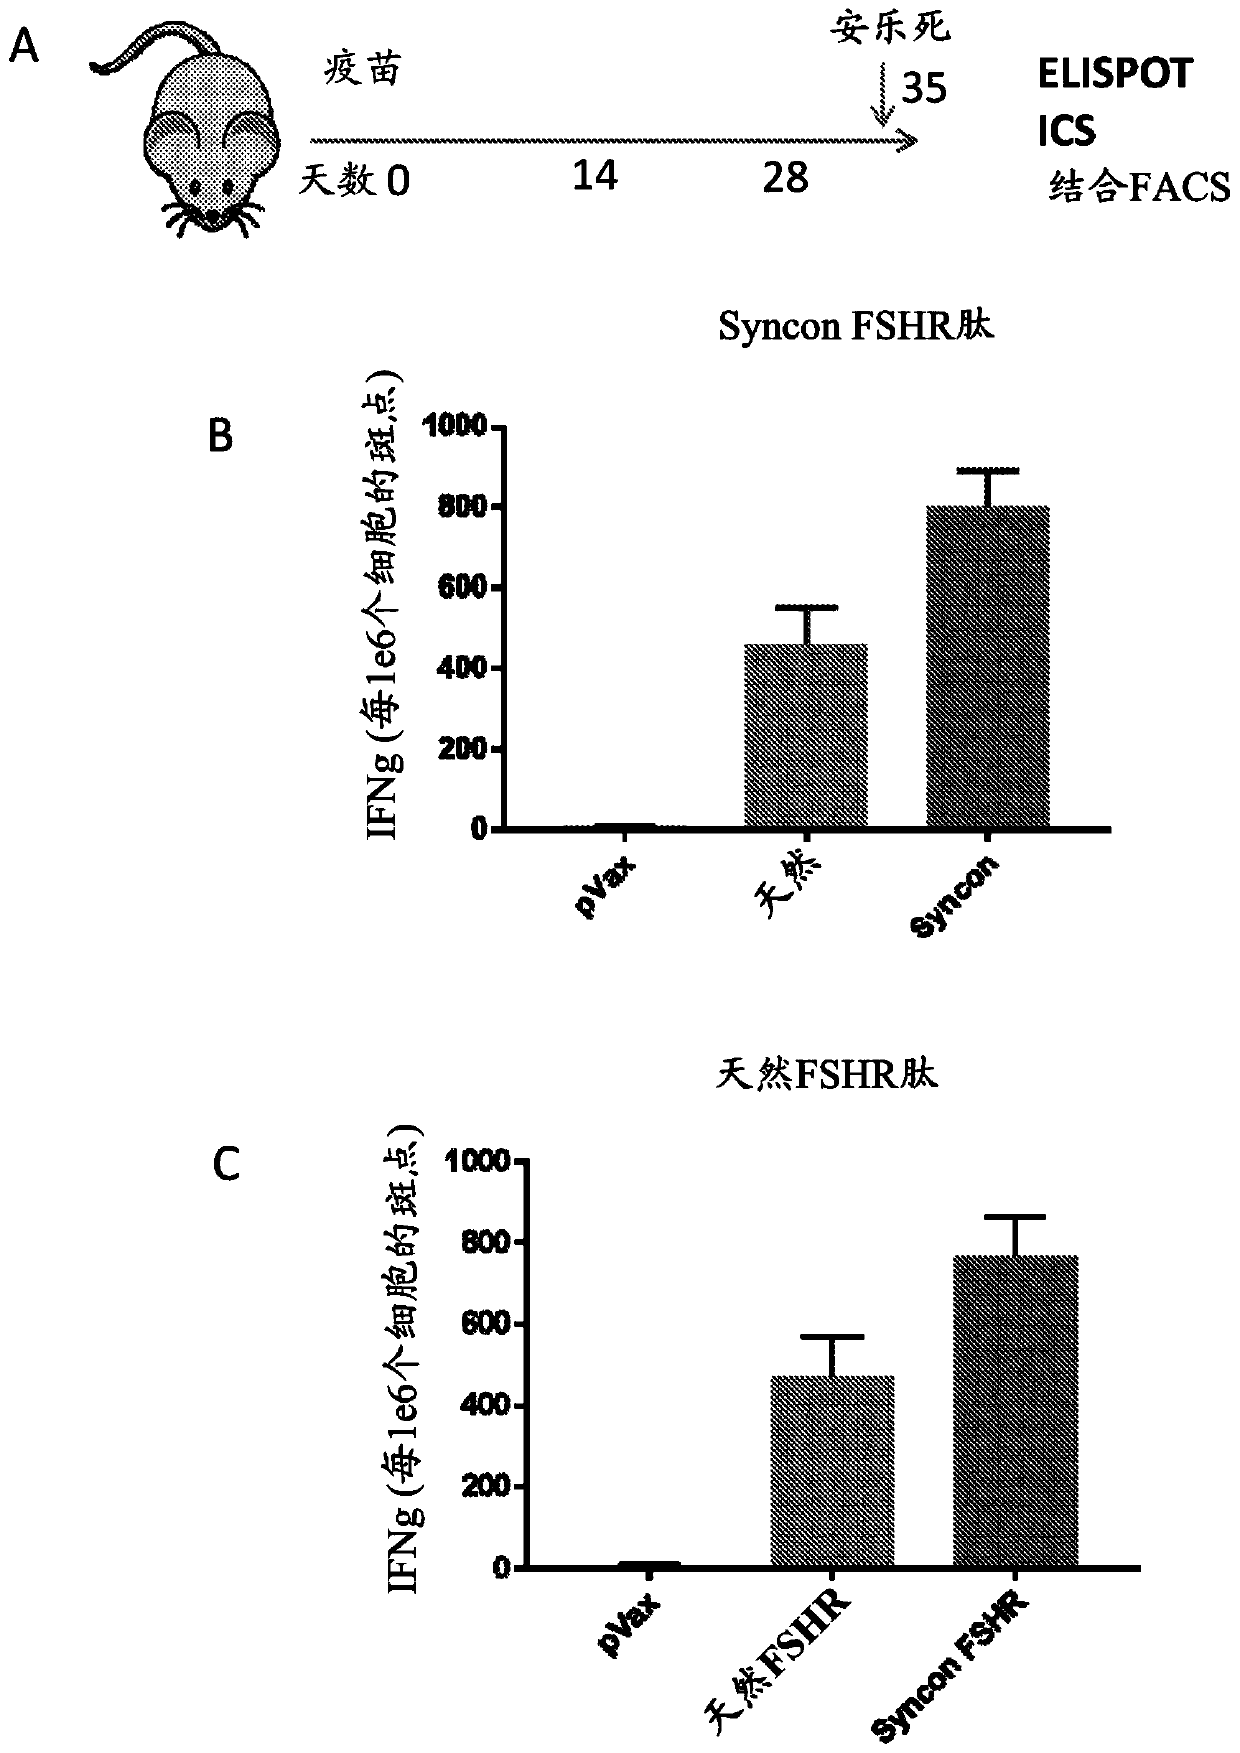 Optimized synthetic consensus immunogenic compositions targeting the follicle stimulating hormone receptor (FSHR)